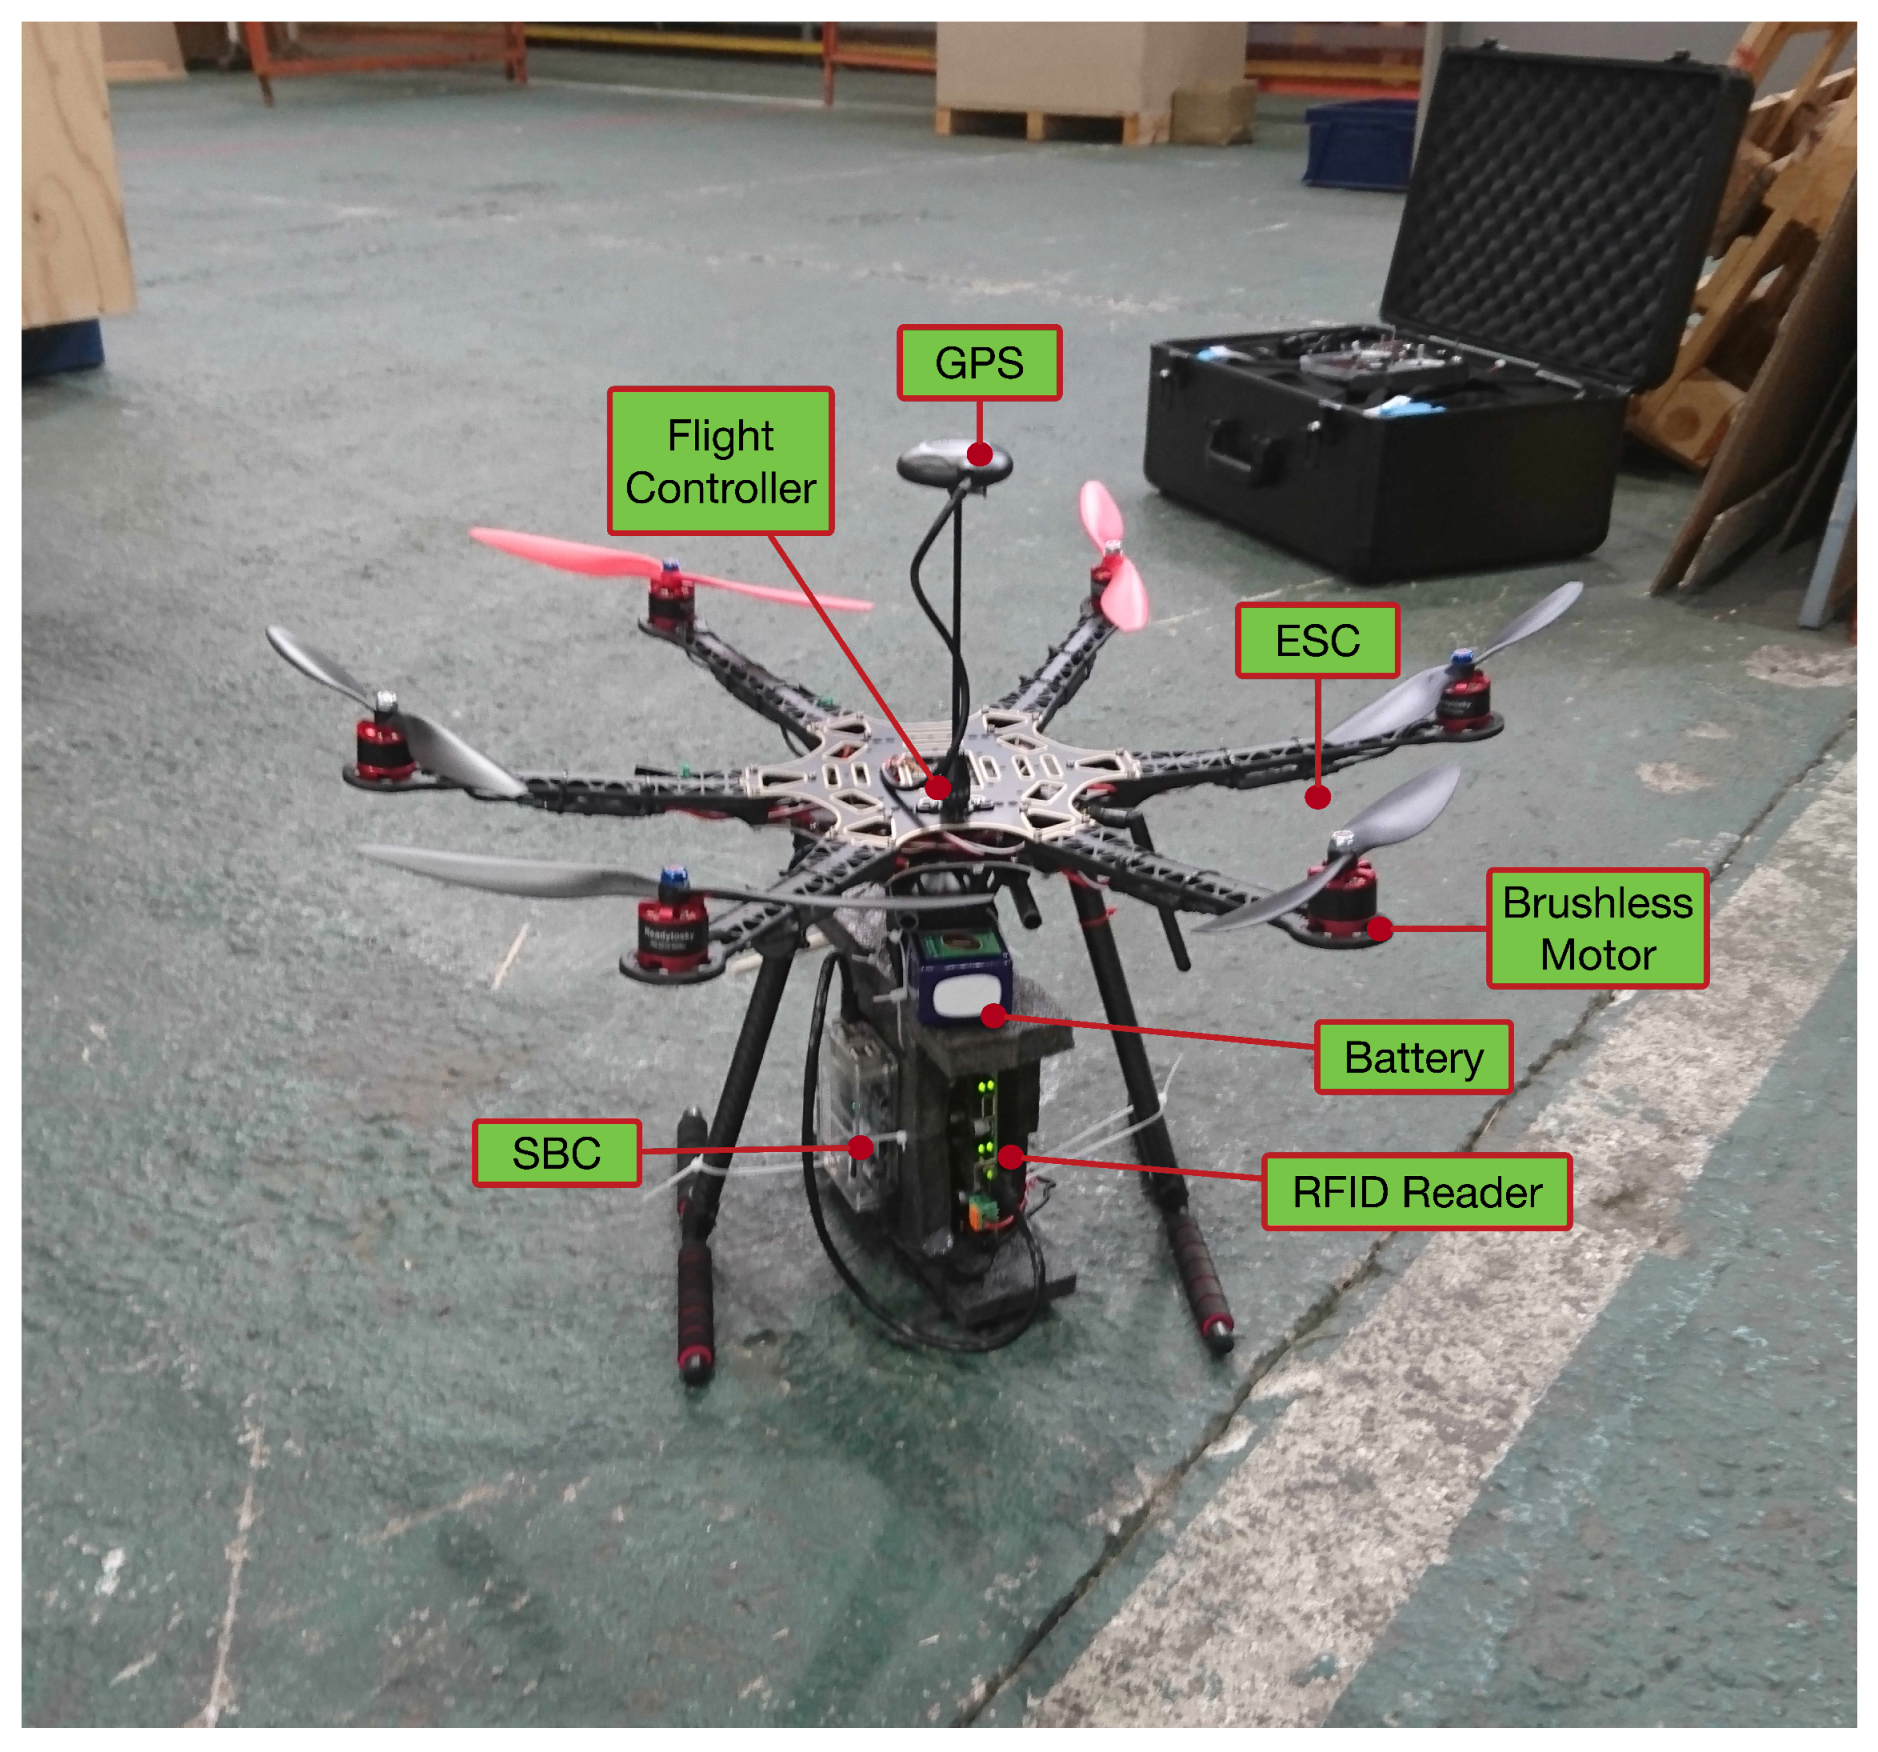 Sensors | Free Full-Text | Towards an Autonomous Industry 4.0 Warehouse: A  UAV and Blockchain-Based System for Inventory and Traceability Applications  in Big Data-Driven Supply Chain Management | HTML